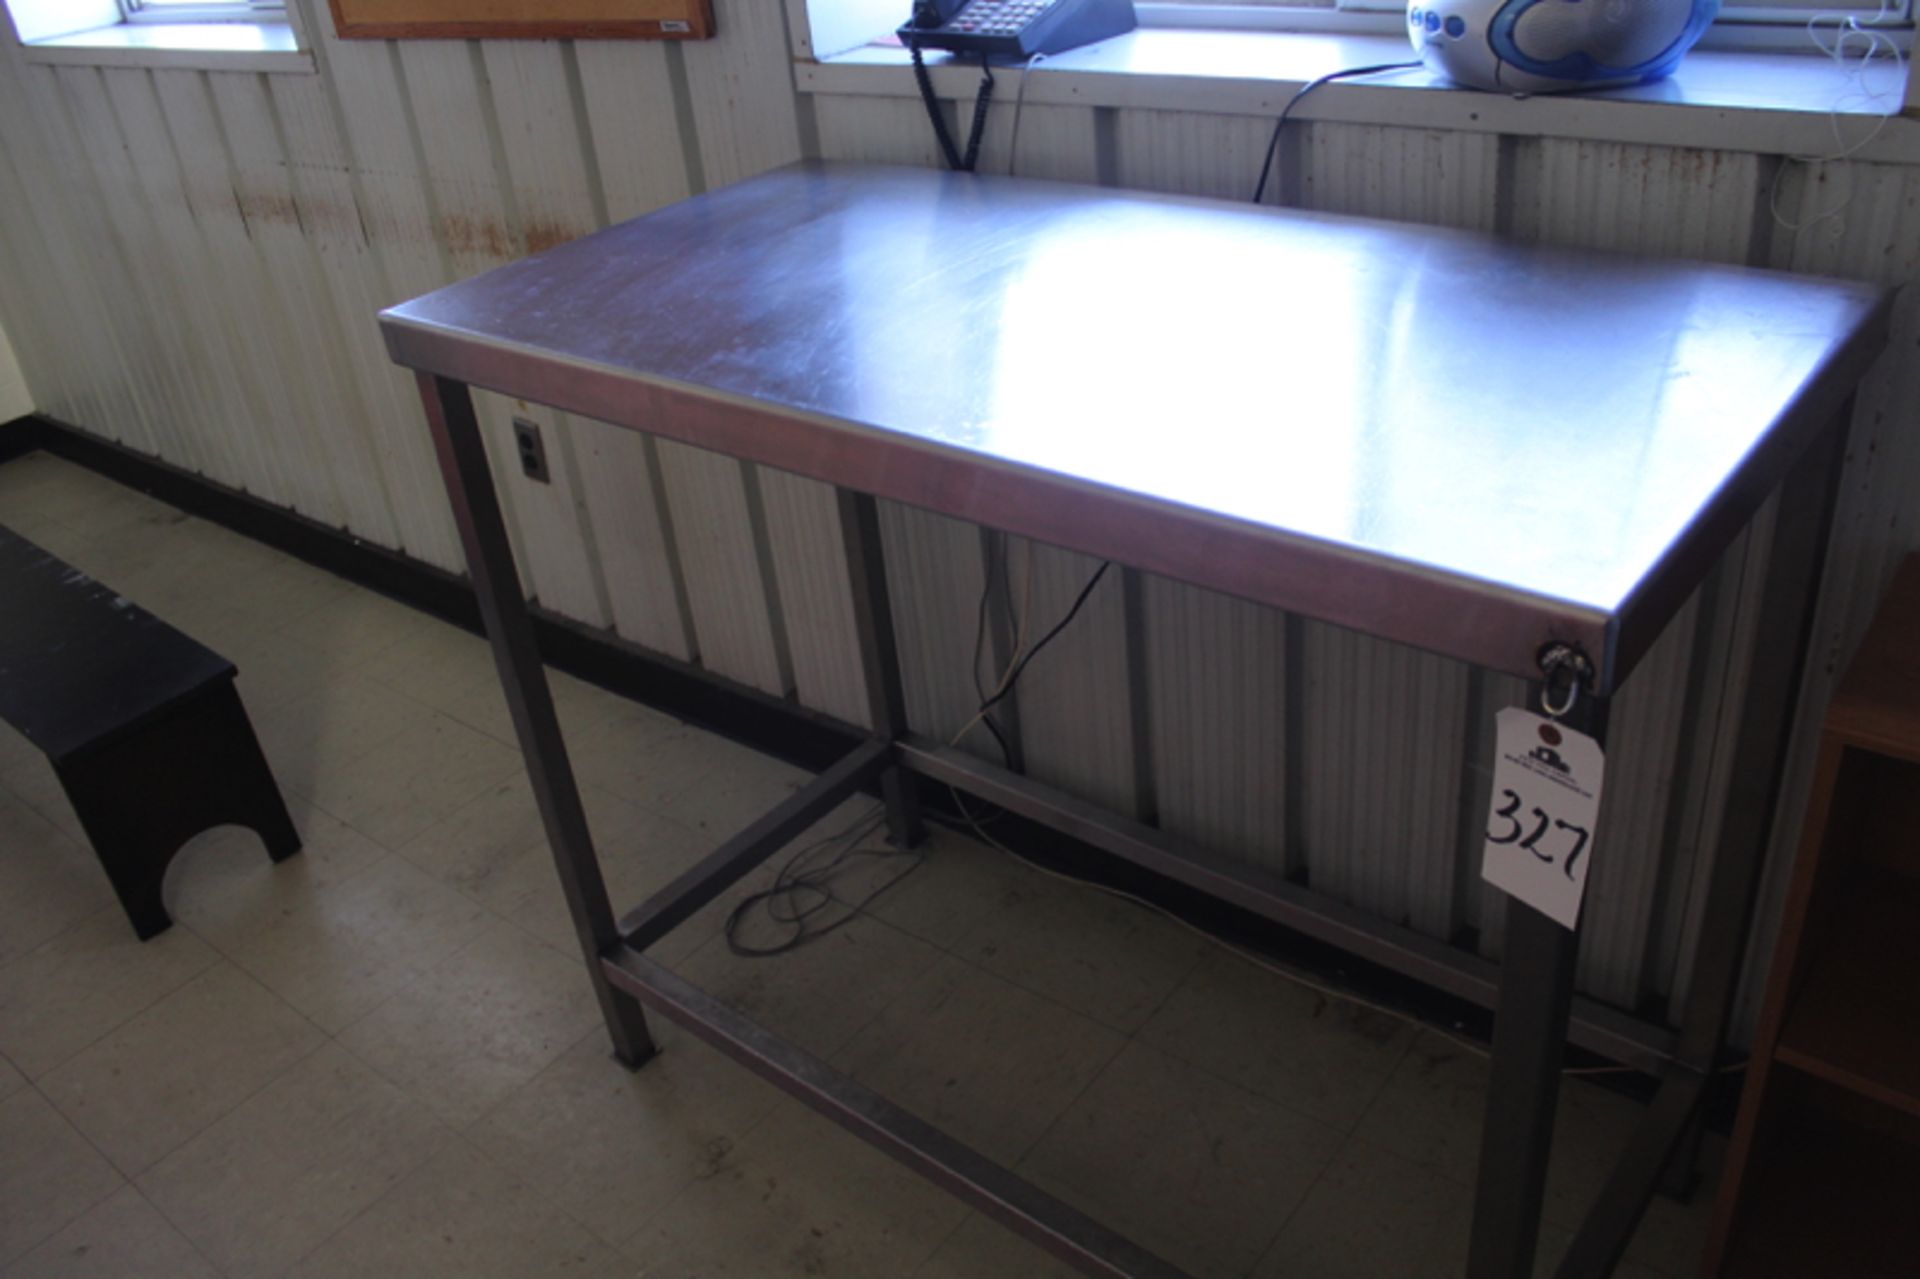 24' x 48" Stainless Table | Location: Dryer Room | Rigging Price: $50